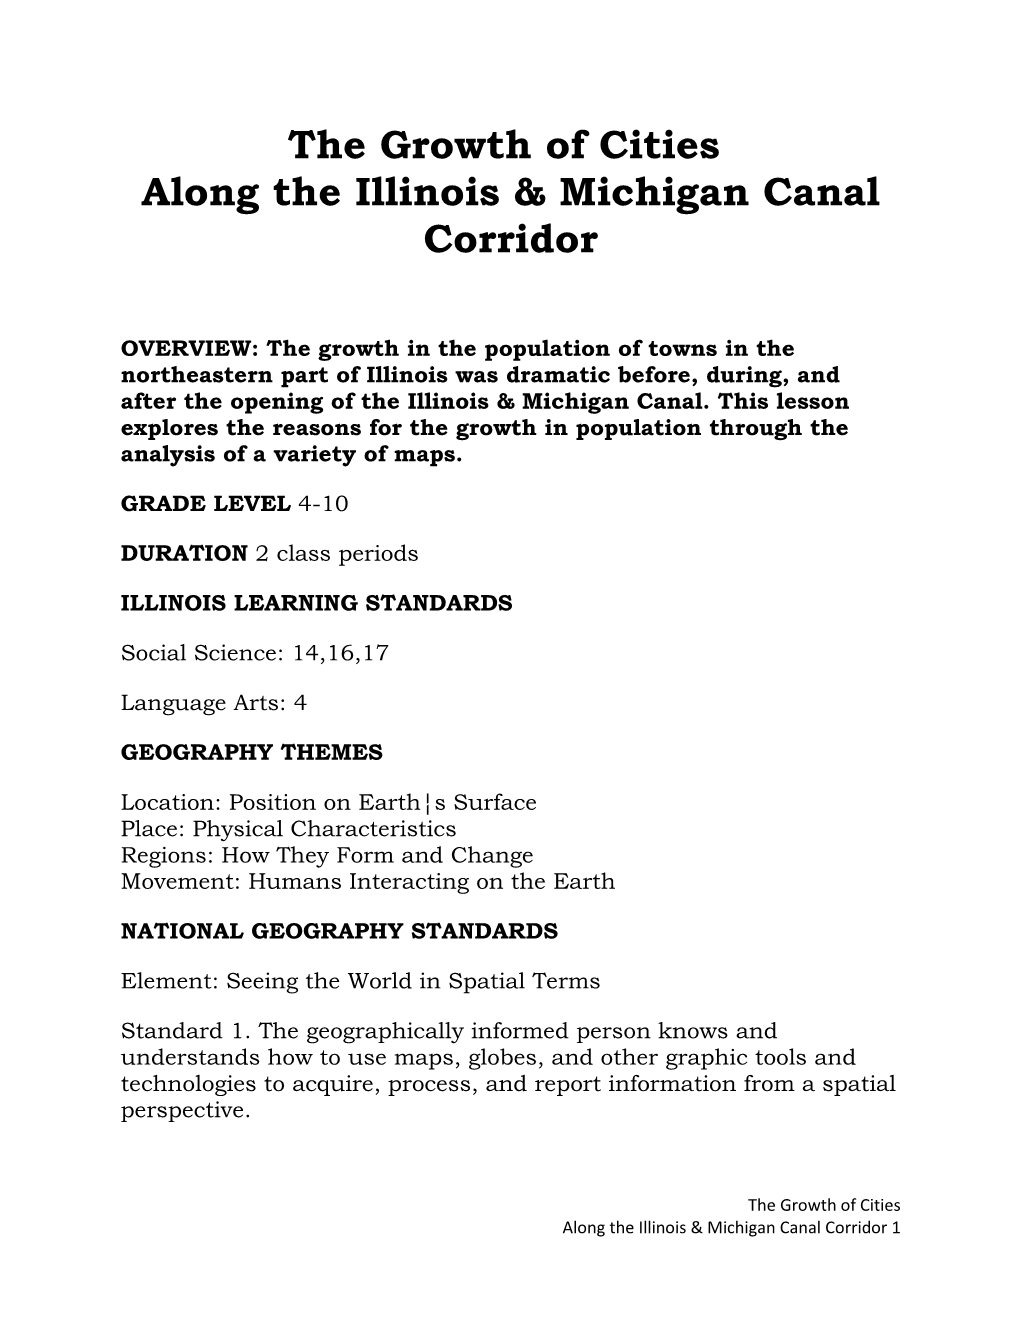 The Growth of Cities Along the Illinois & Michigan Canal Corridor